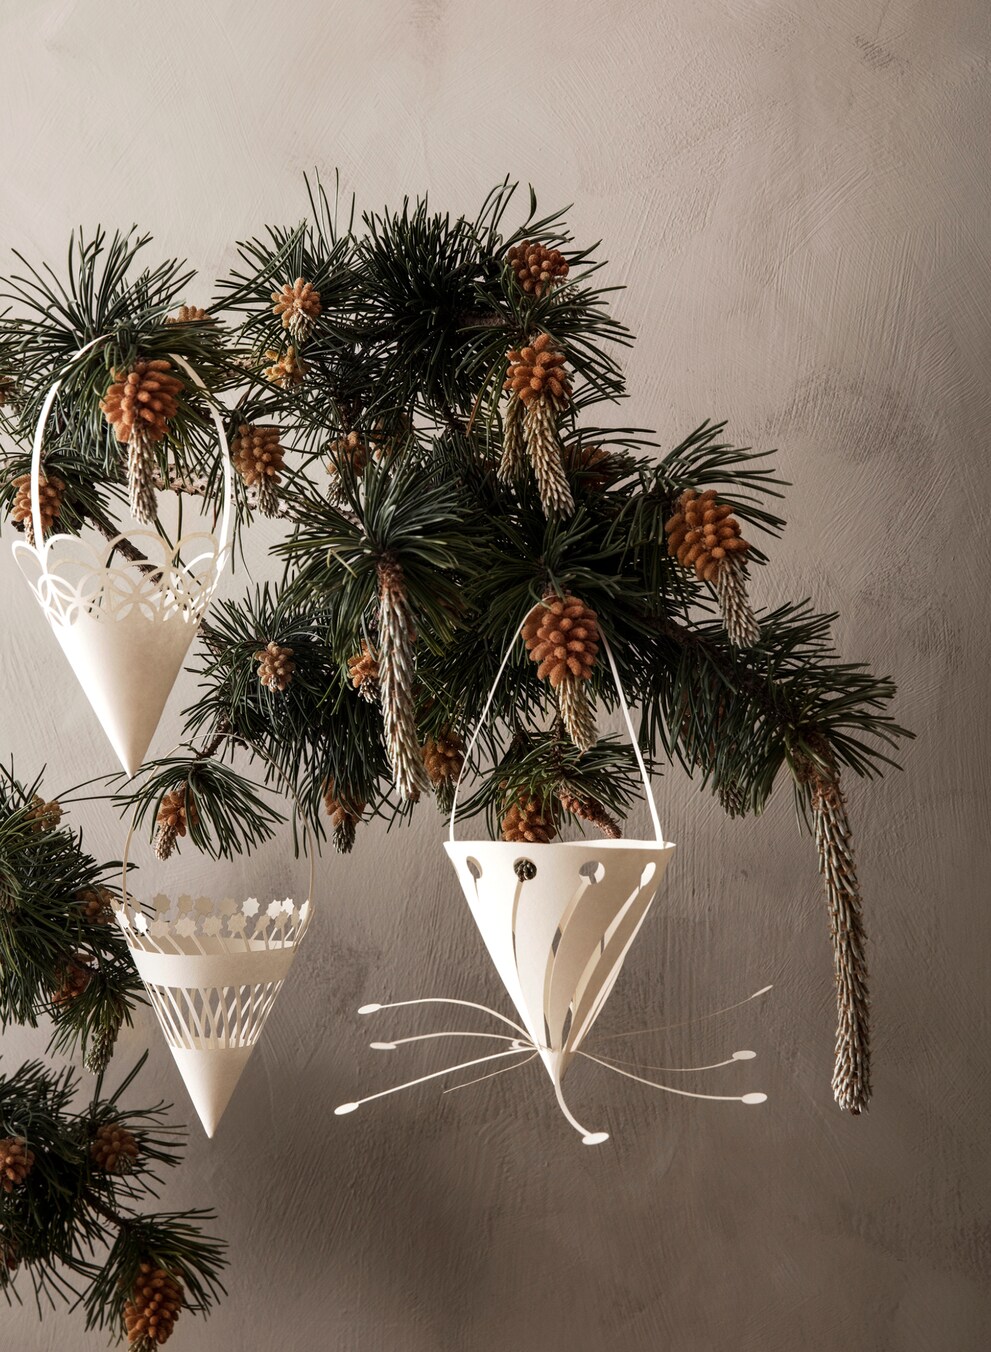 Intricate paper decorations are suitable for every season. Image: Ferm Living